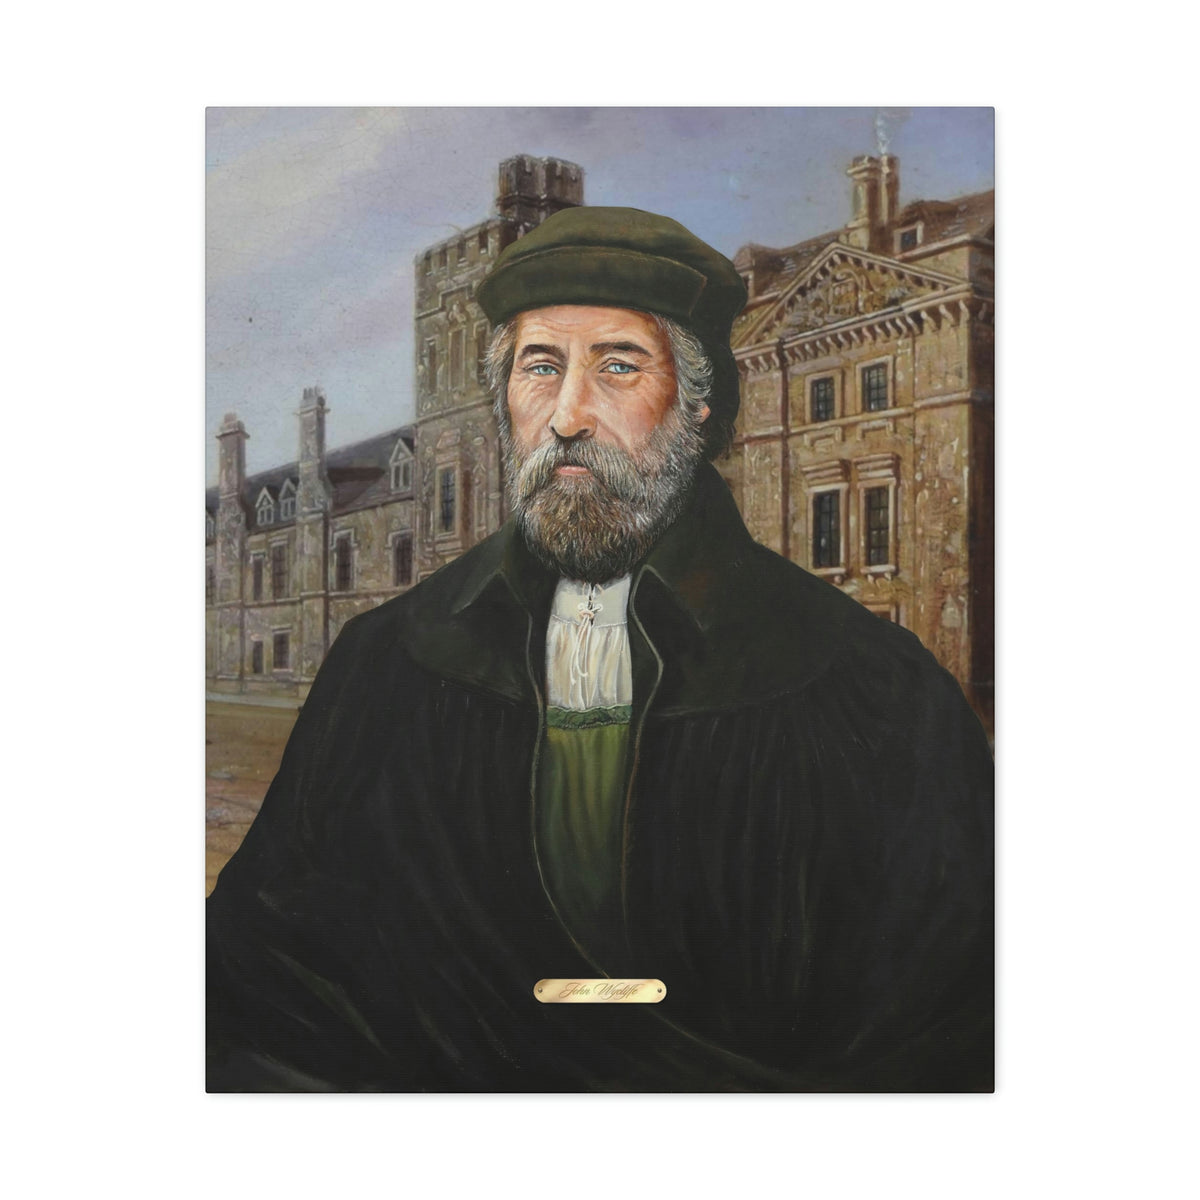 Oil Portrait Series with Faux Nameplate - John Wycliffe